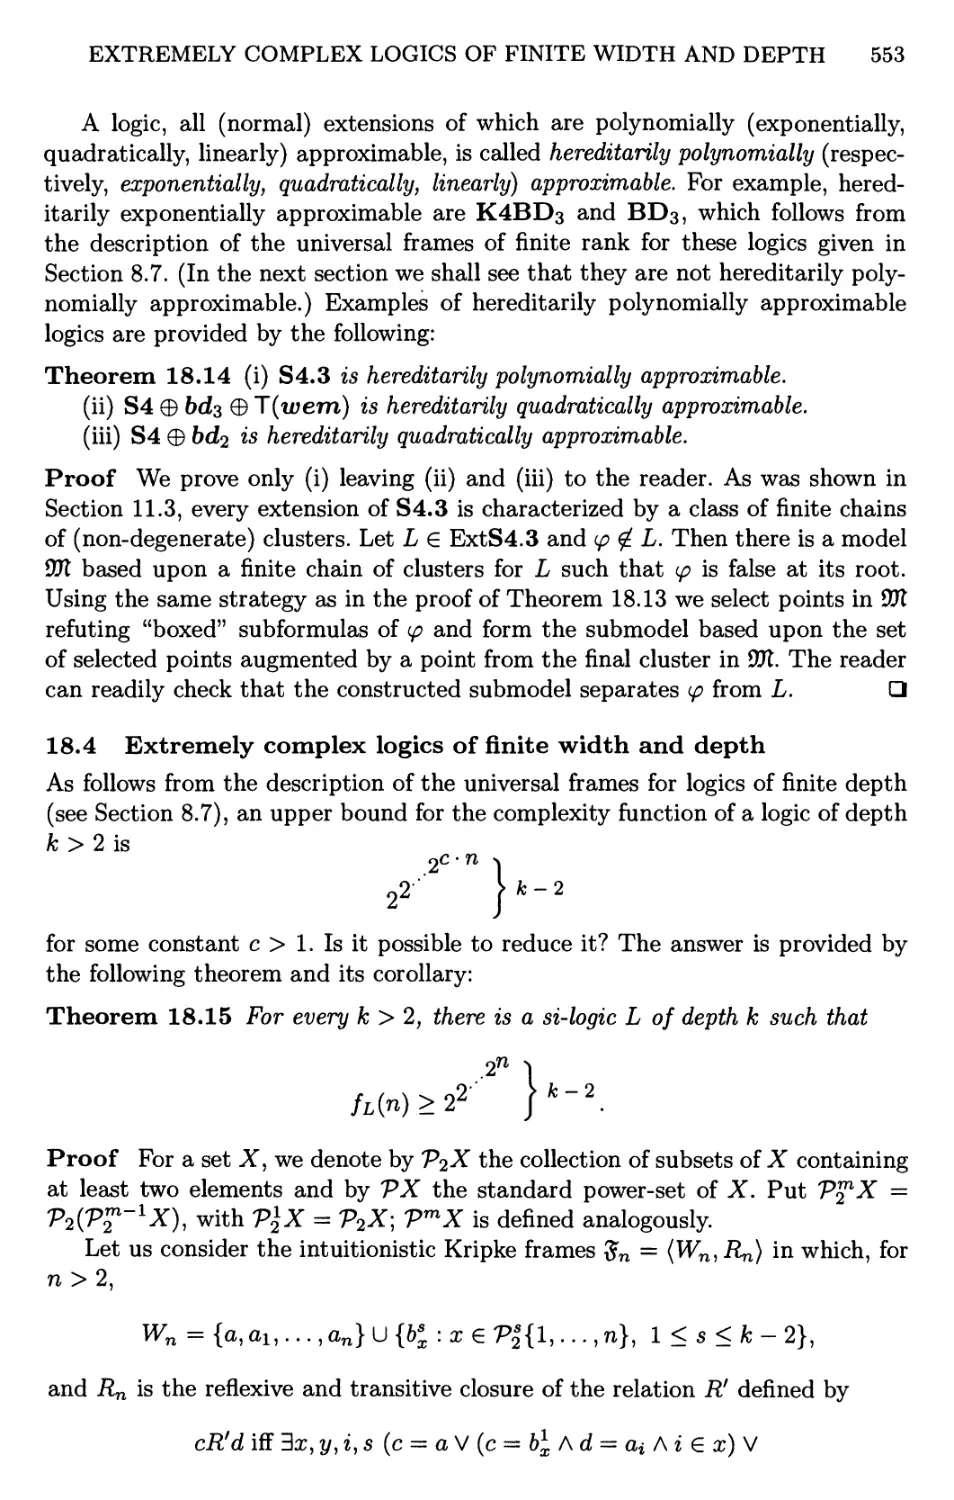 18.4 Extremely complex logics of finite width and depth